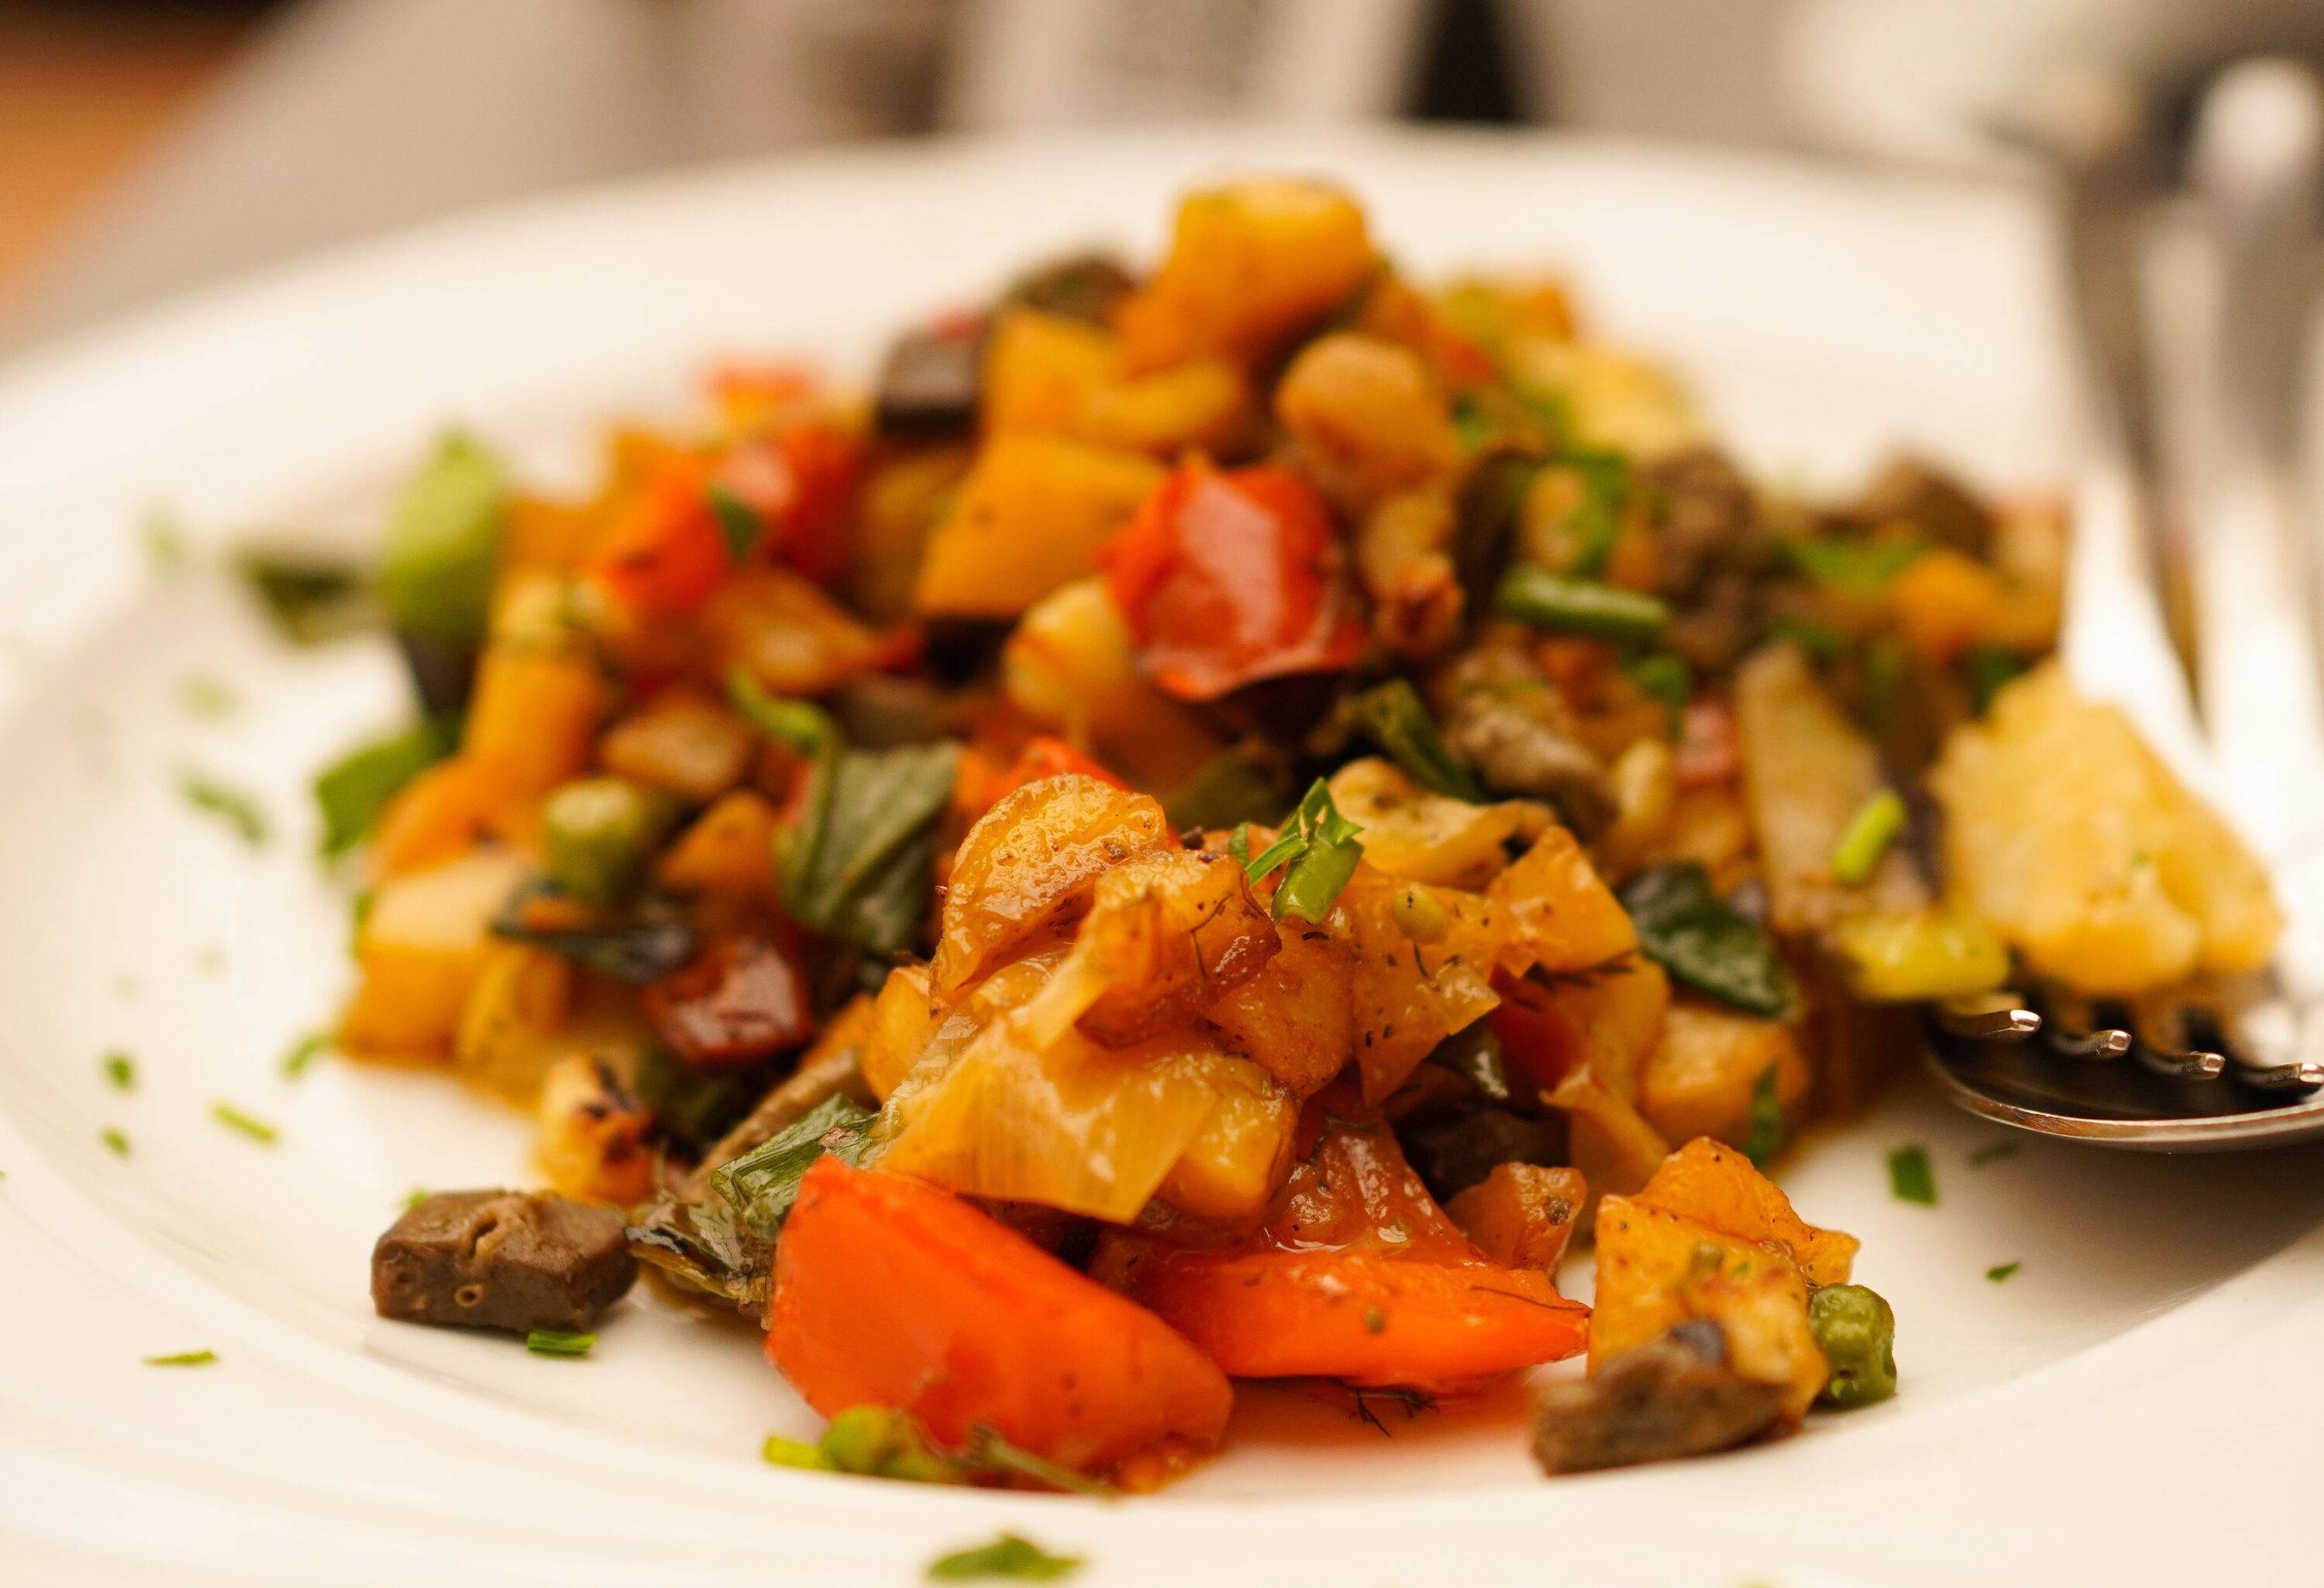 A stir-fried dish with potatoes, carrots, and green vegetables.